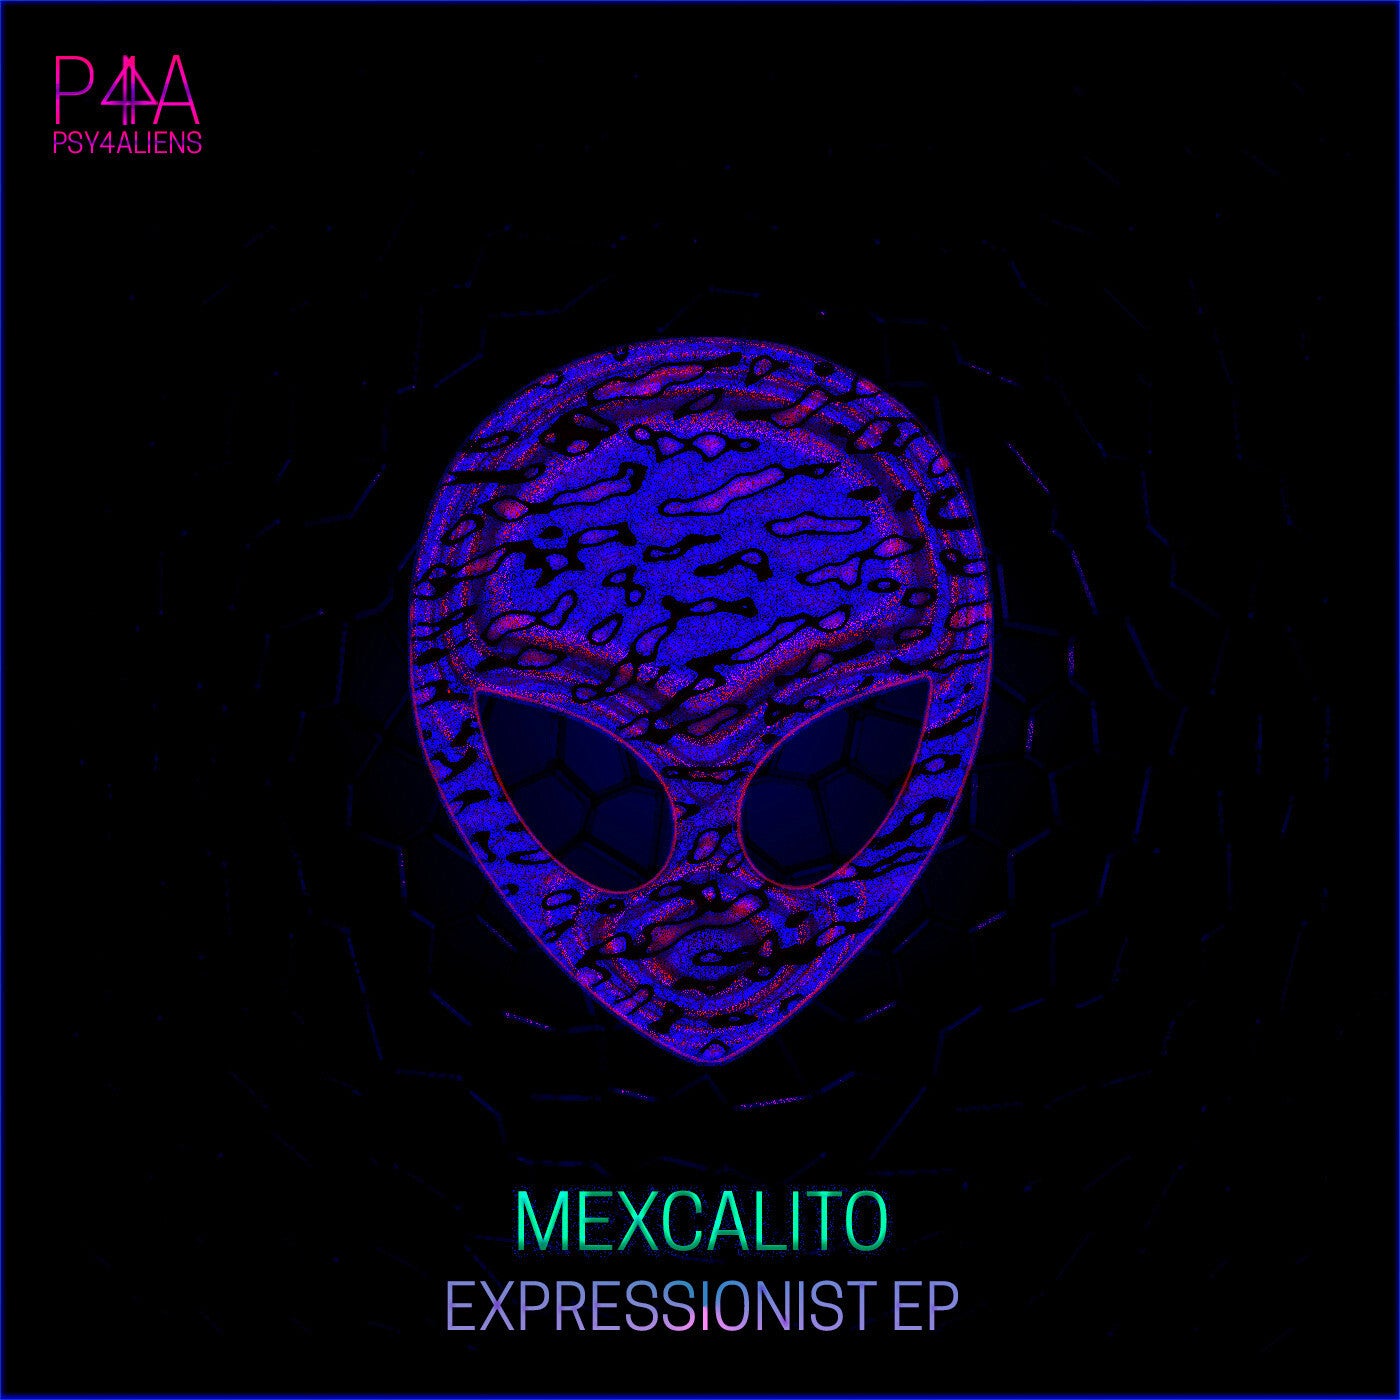 Expressionist EP